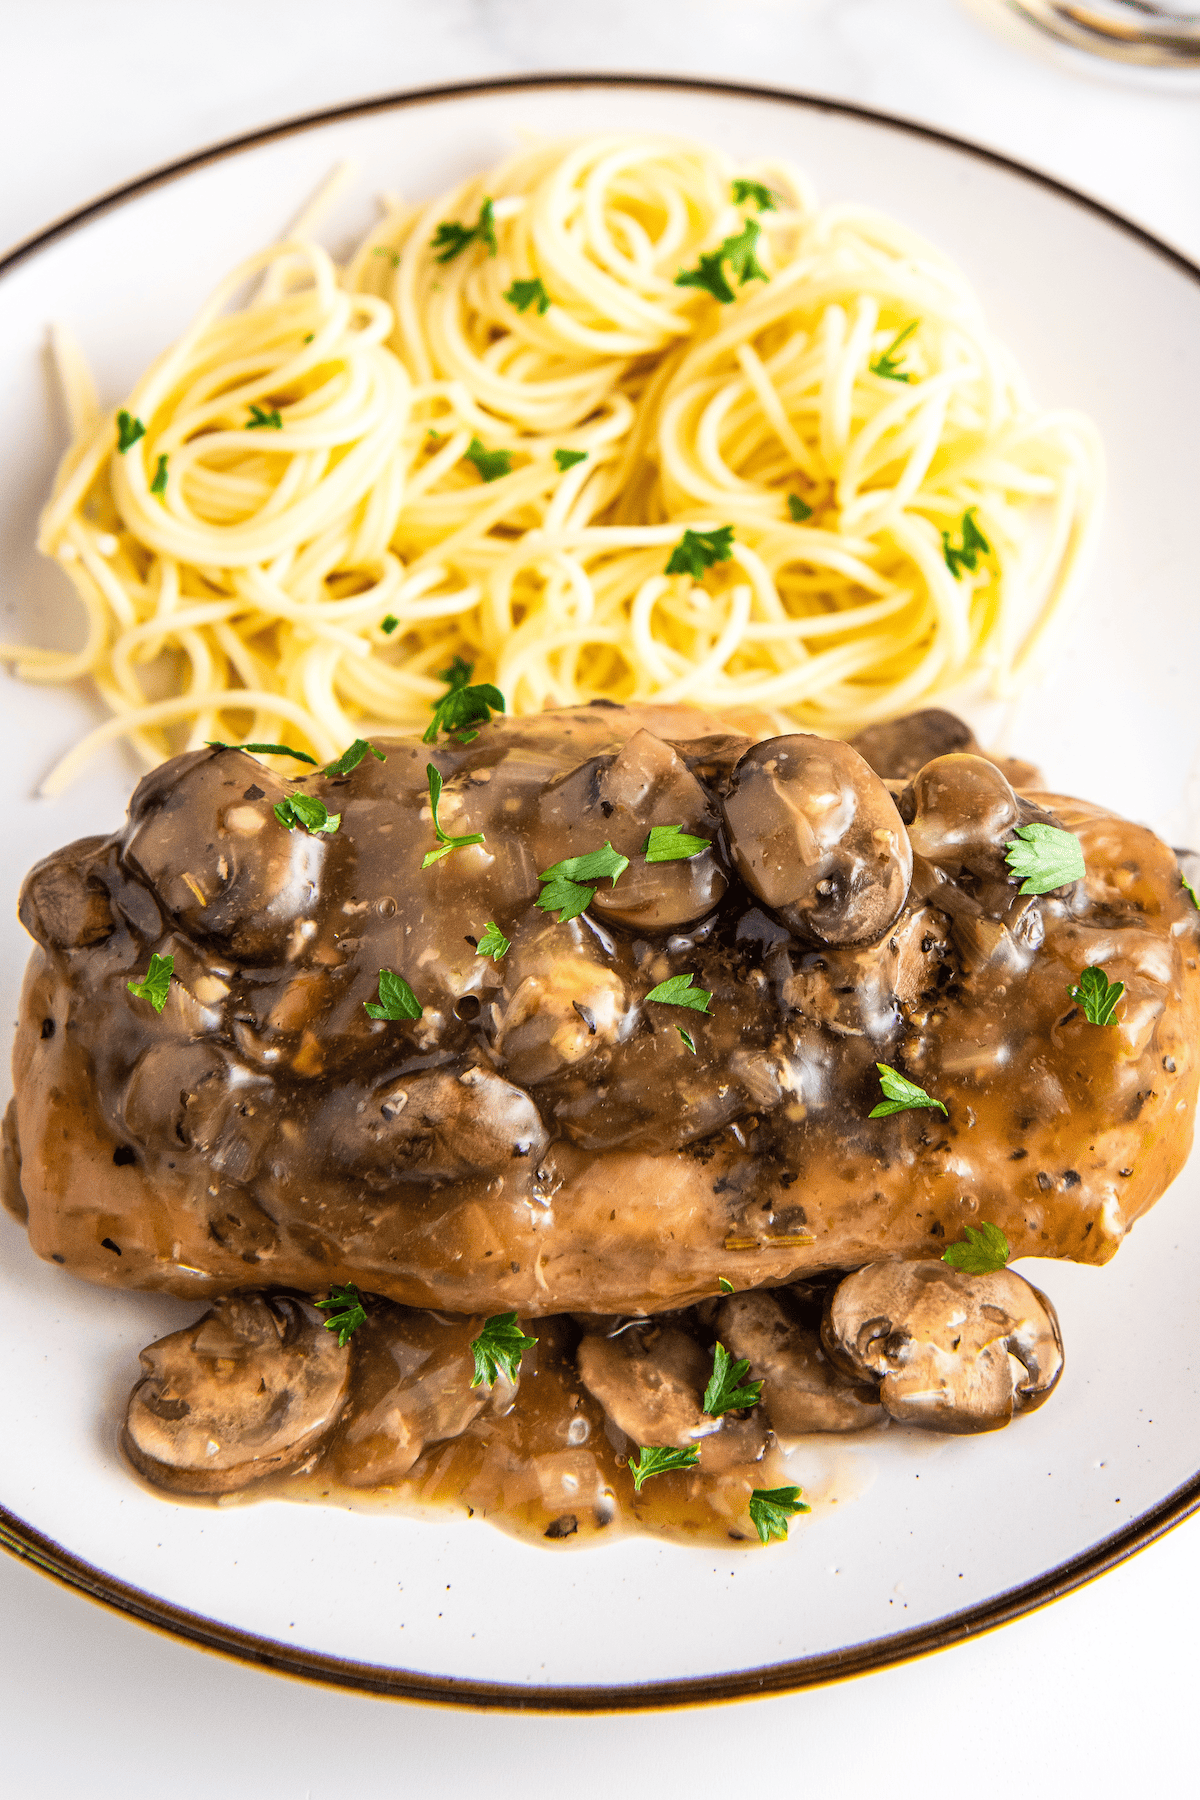 A plate with chicken marsala and spaghetti on it